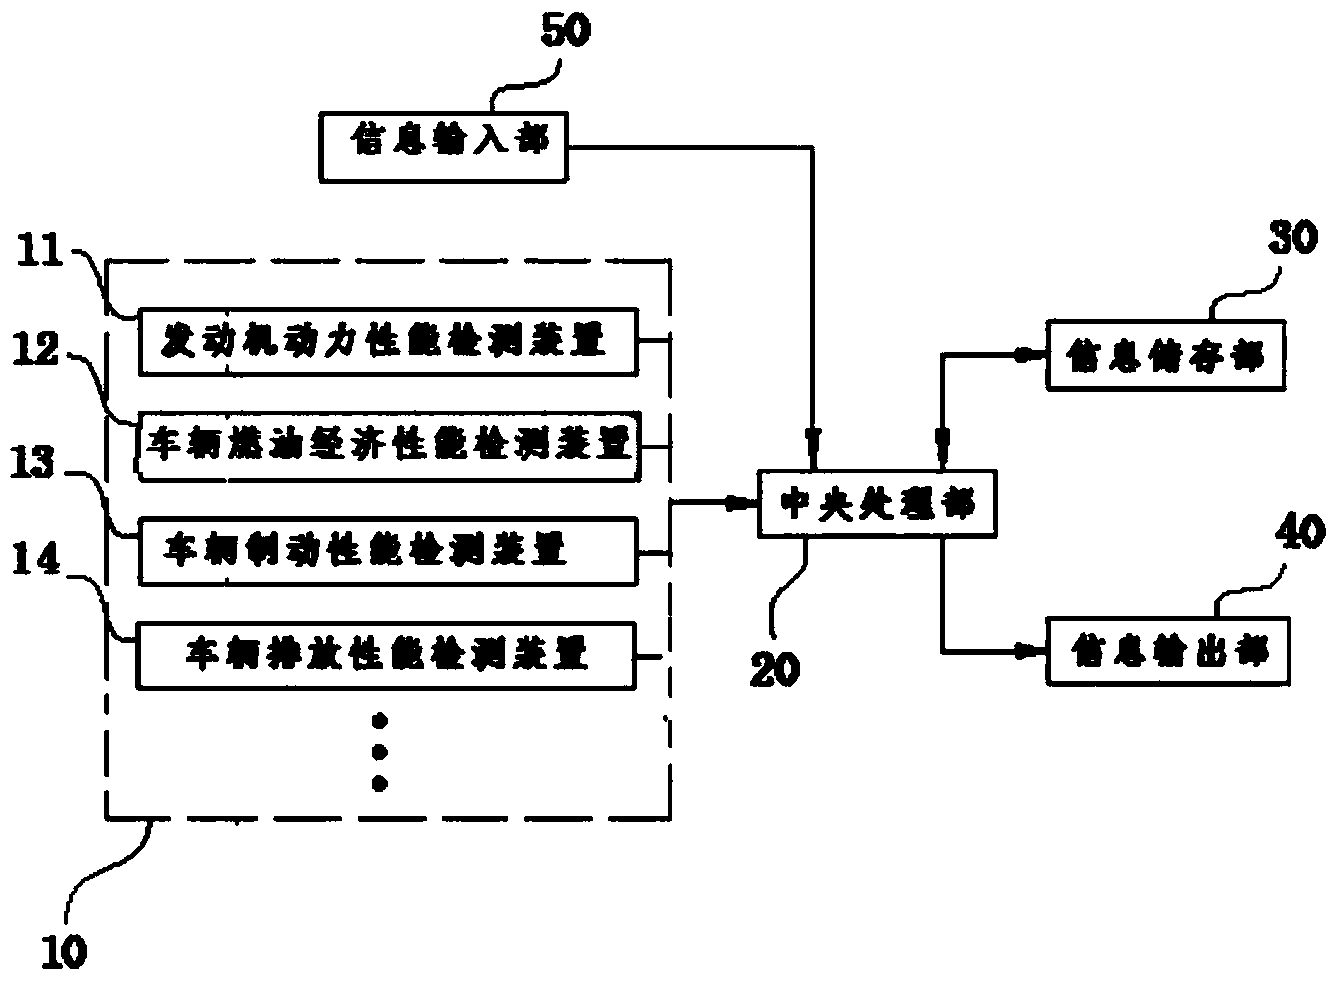 Method and system for quantifying evaluation and estimation of second-hand automobiles